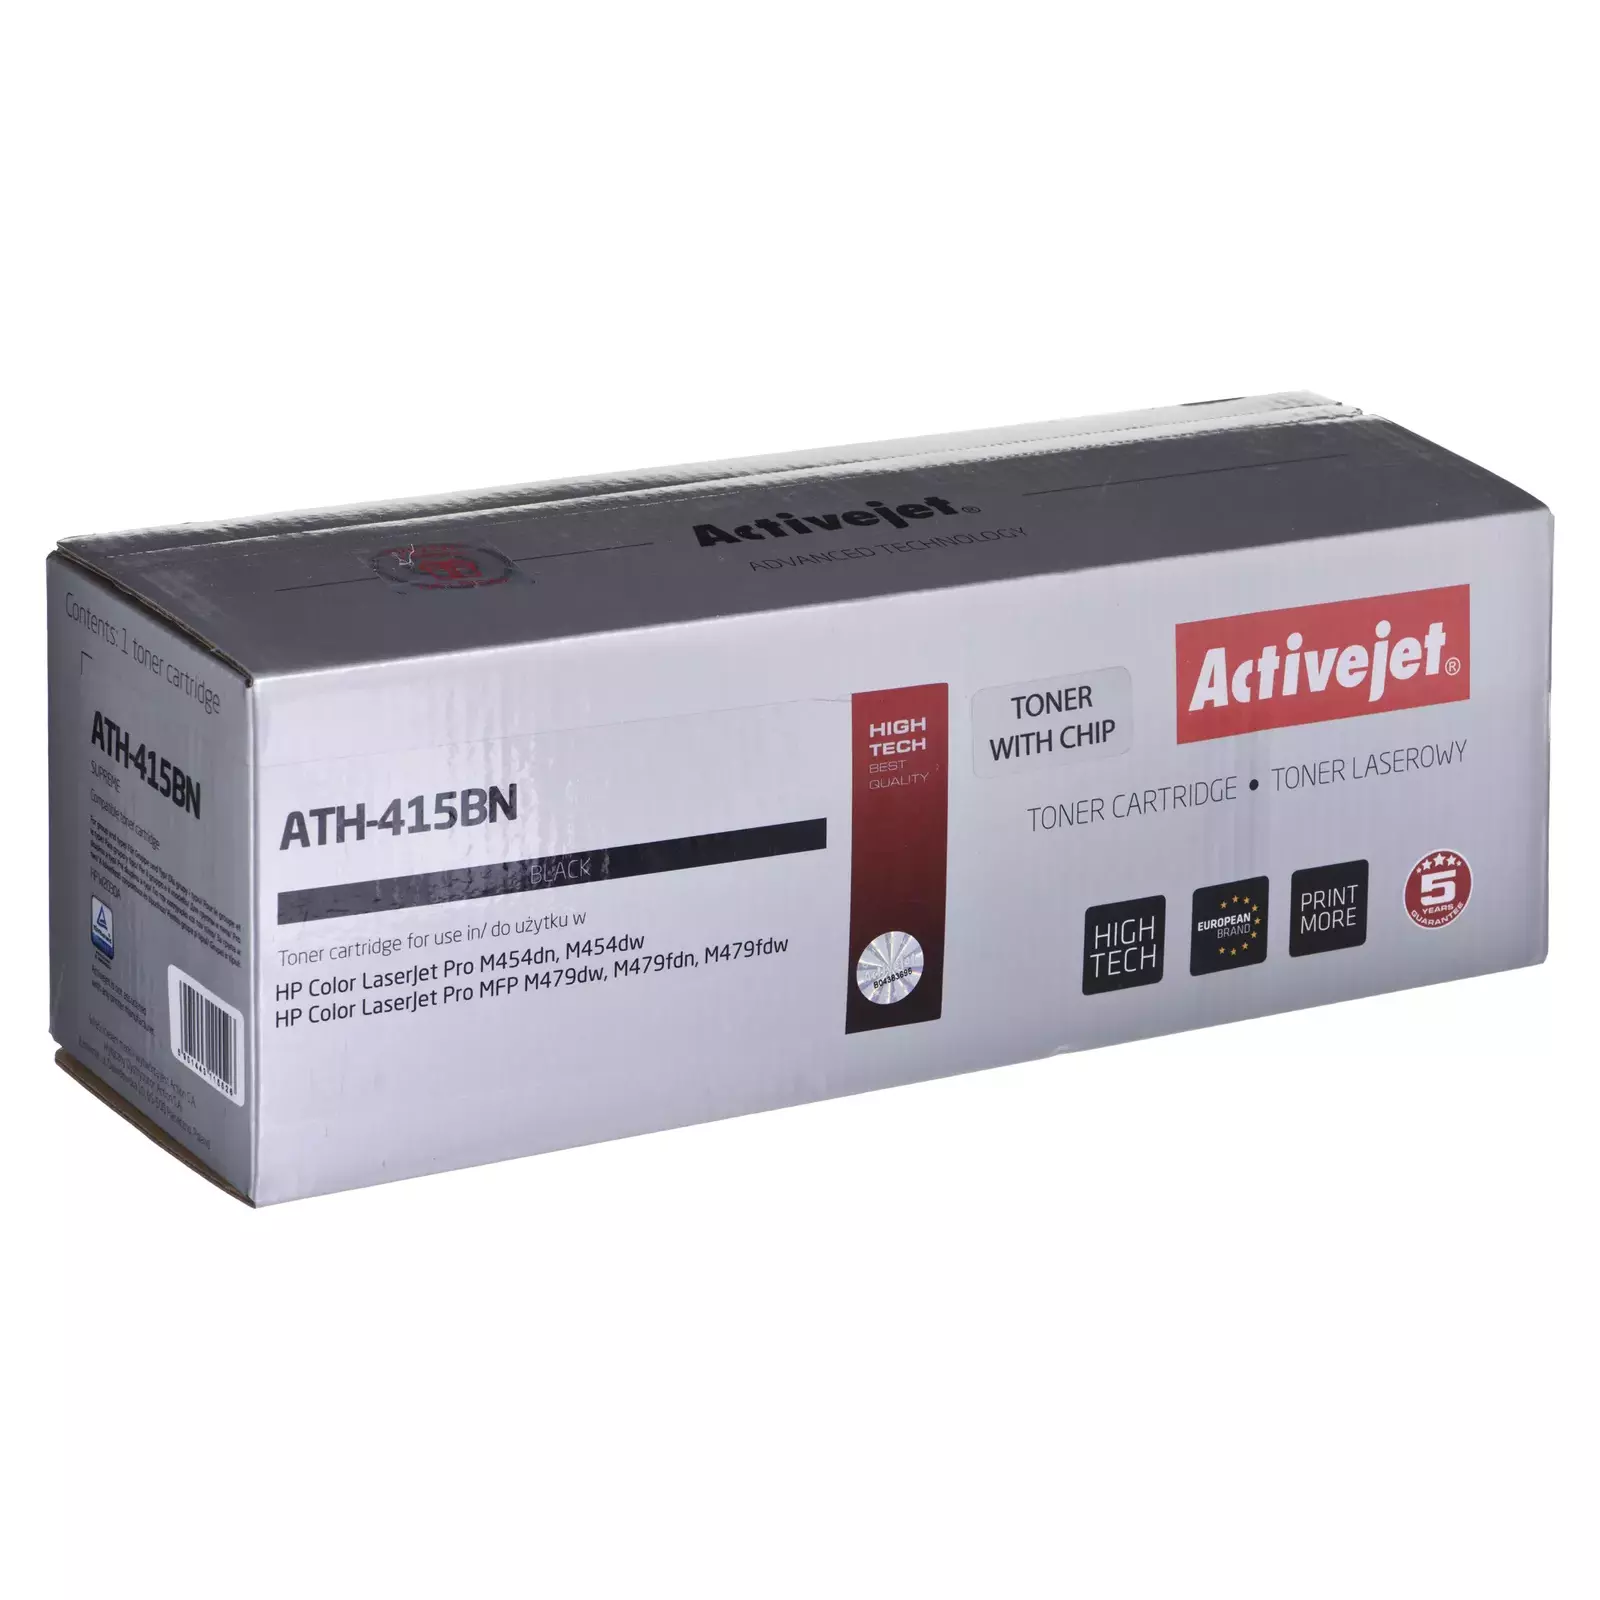 ActiveJet ATH-415BN CHIP Photo 1